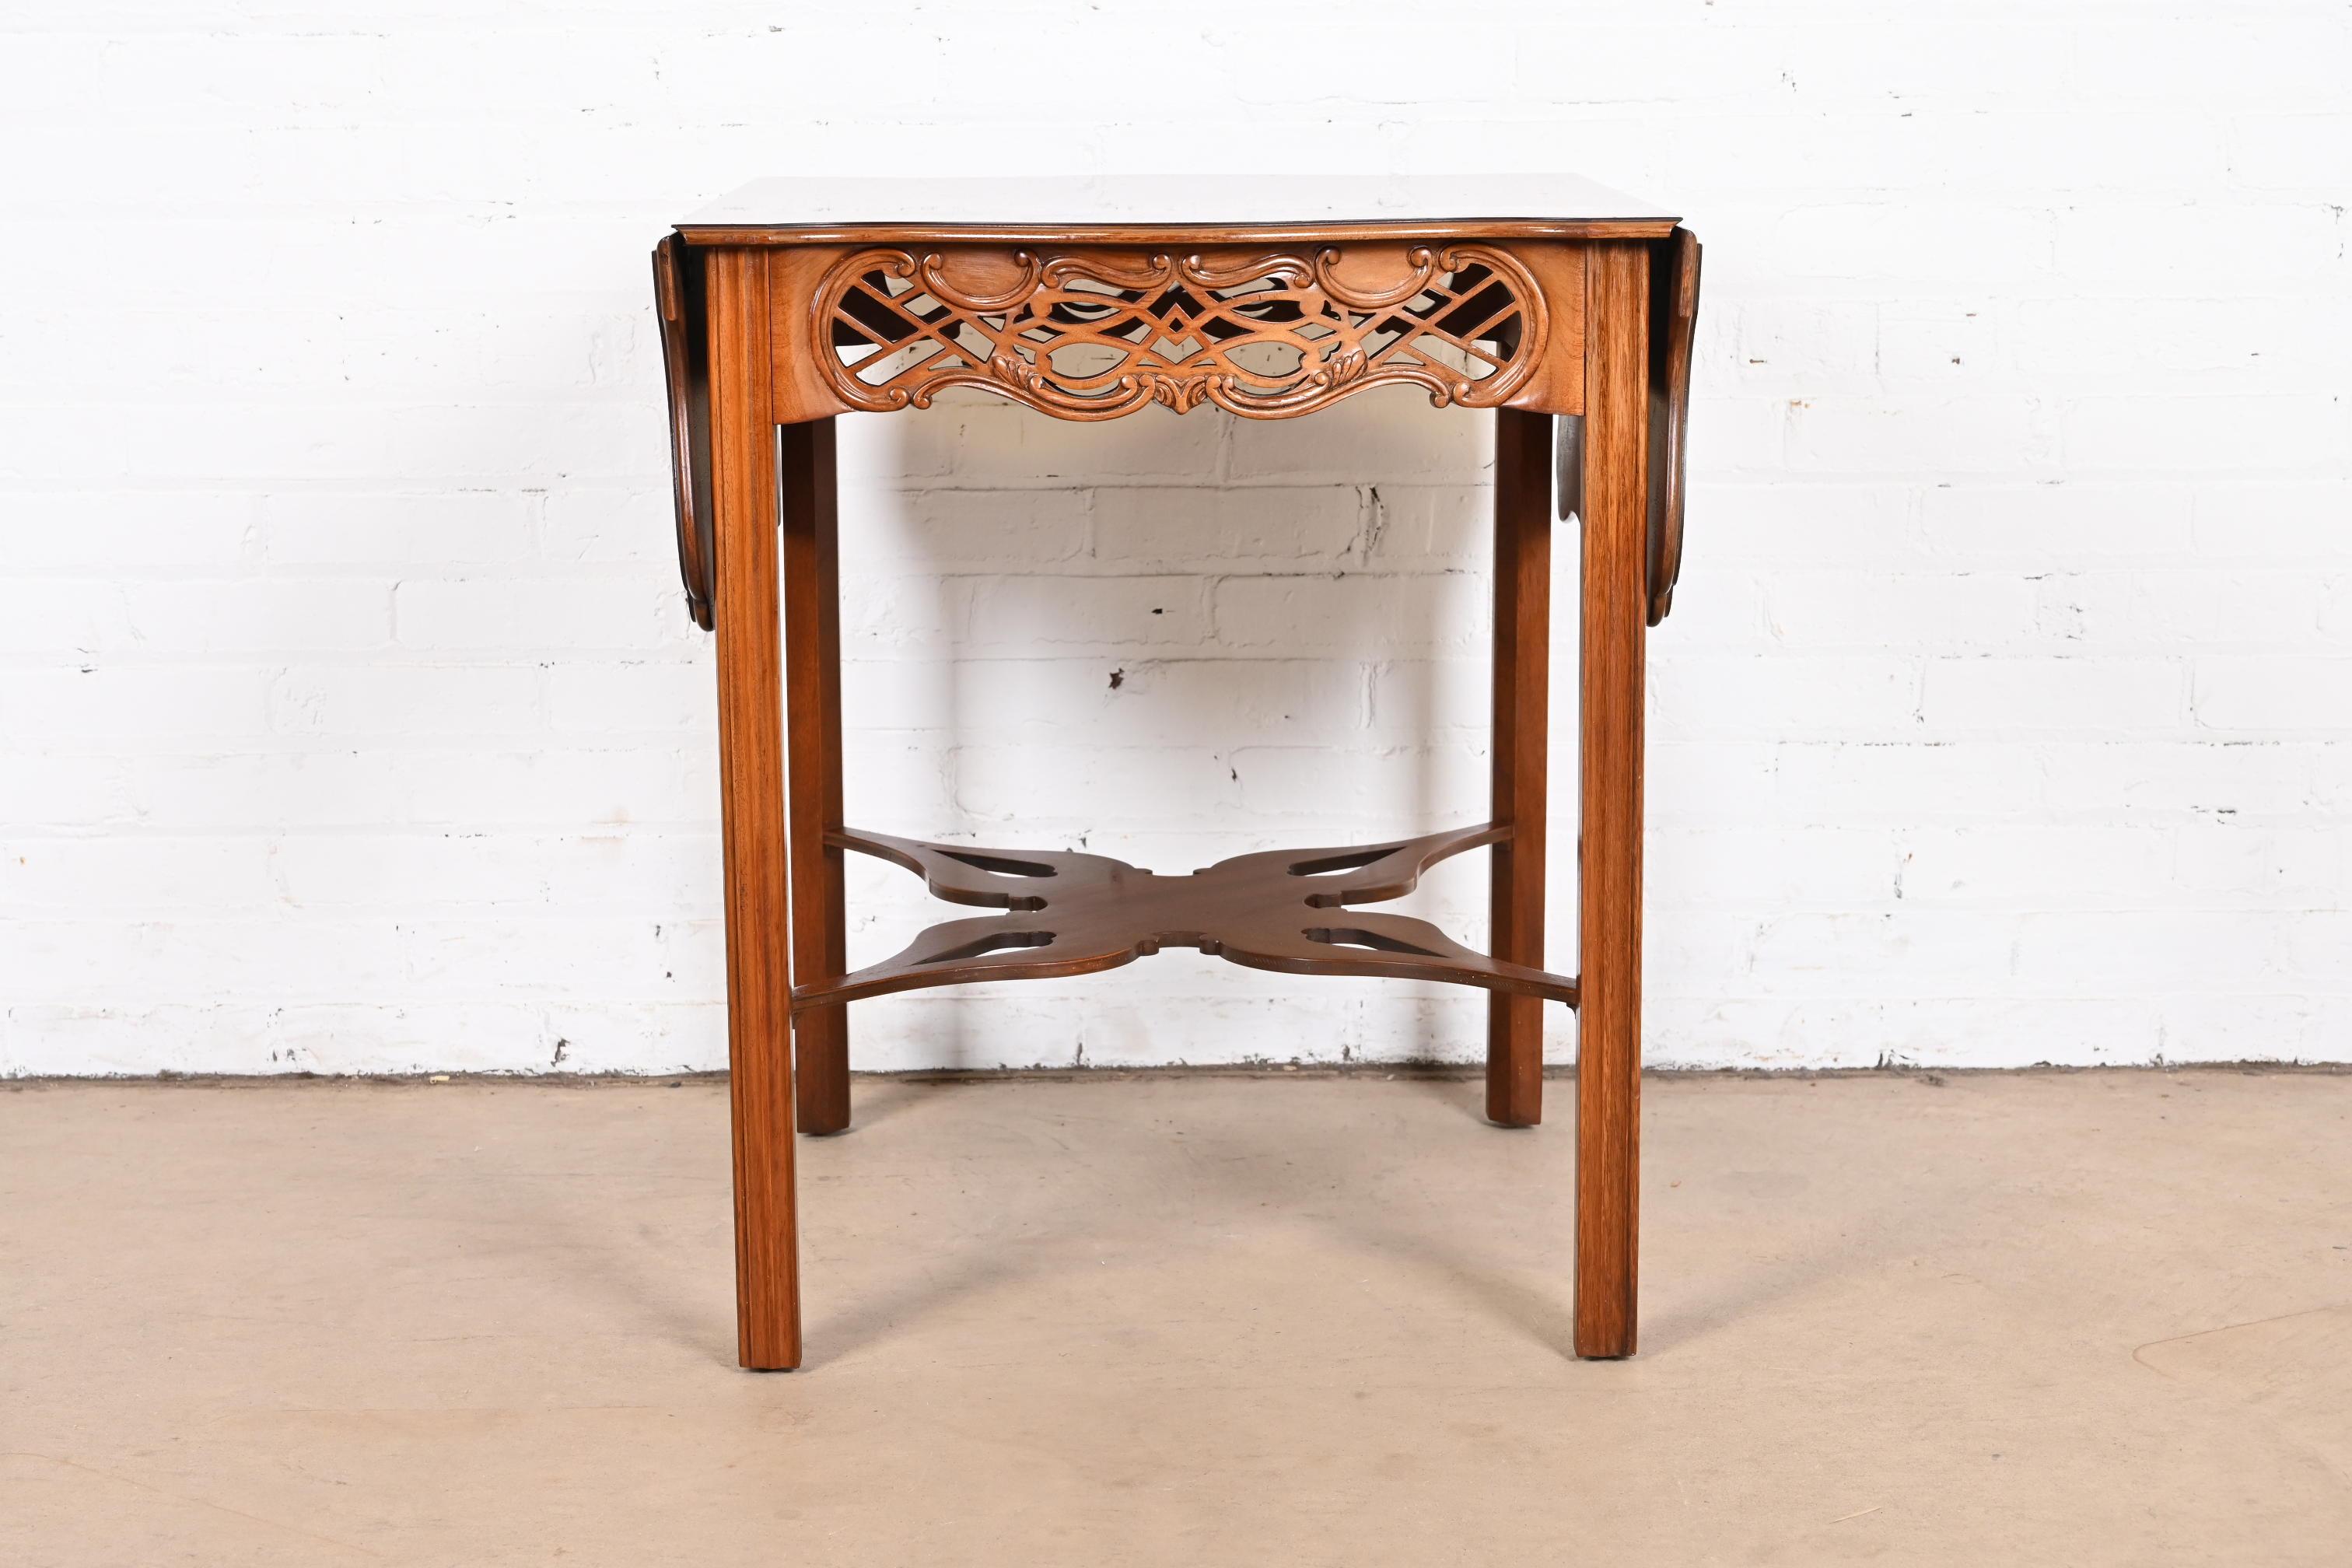 A beautiful Chippendale or Georgian style carved mahogany pembroke drop-leaf occasional side table or tea table

By Baker Furniture, 